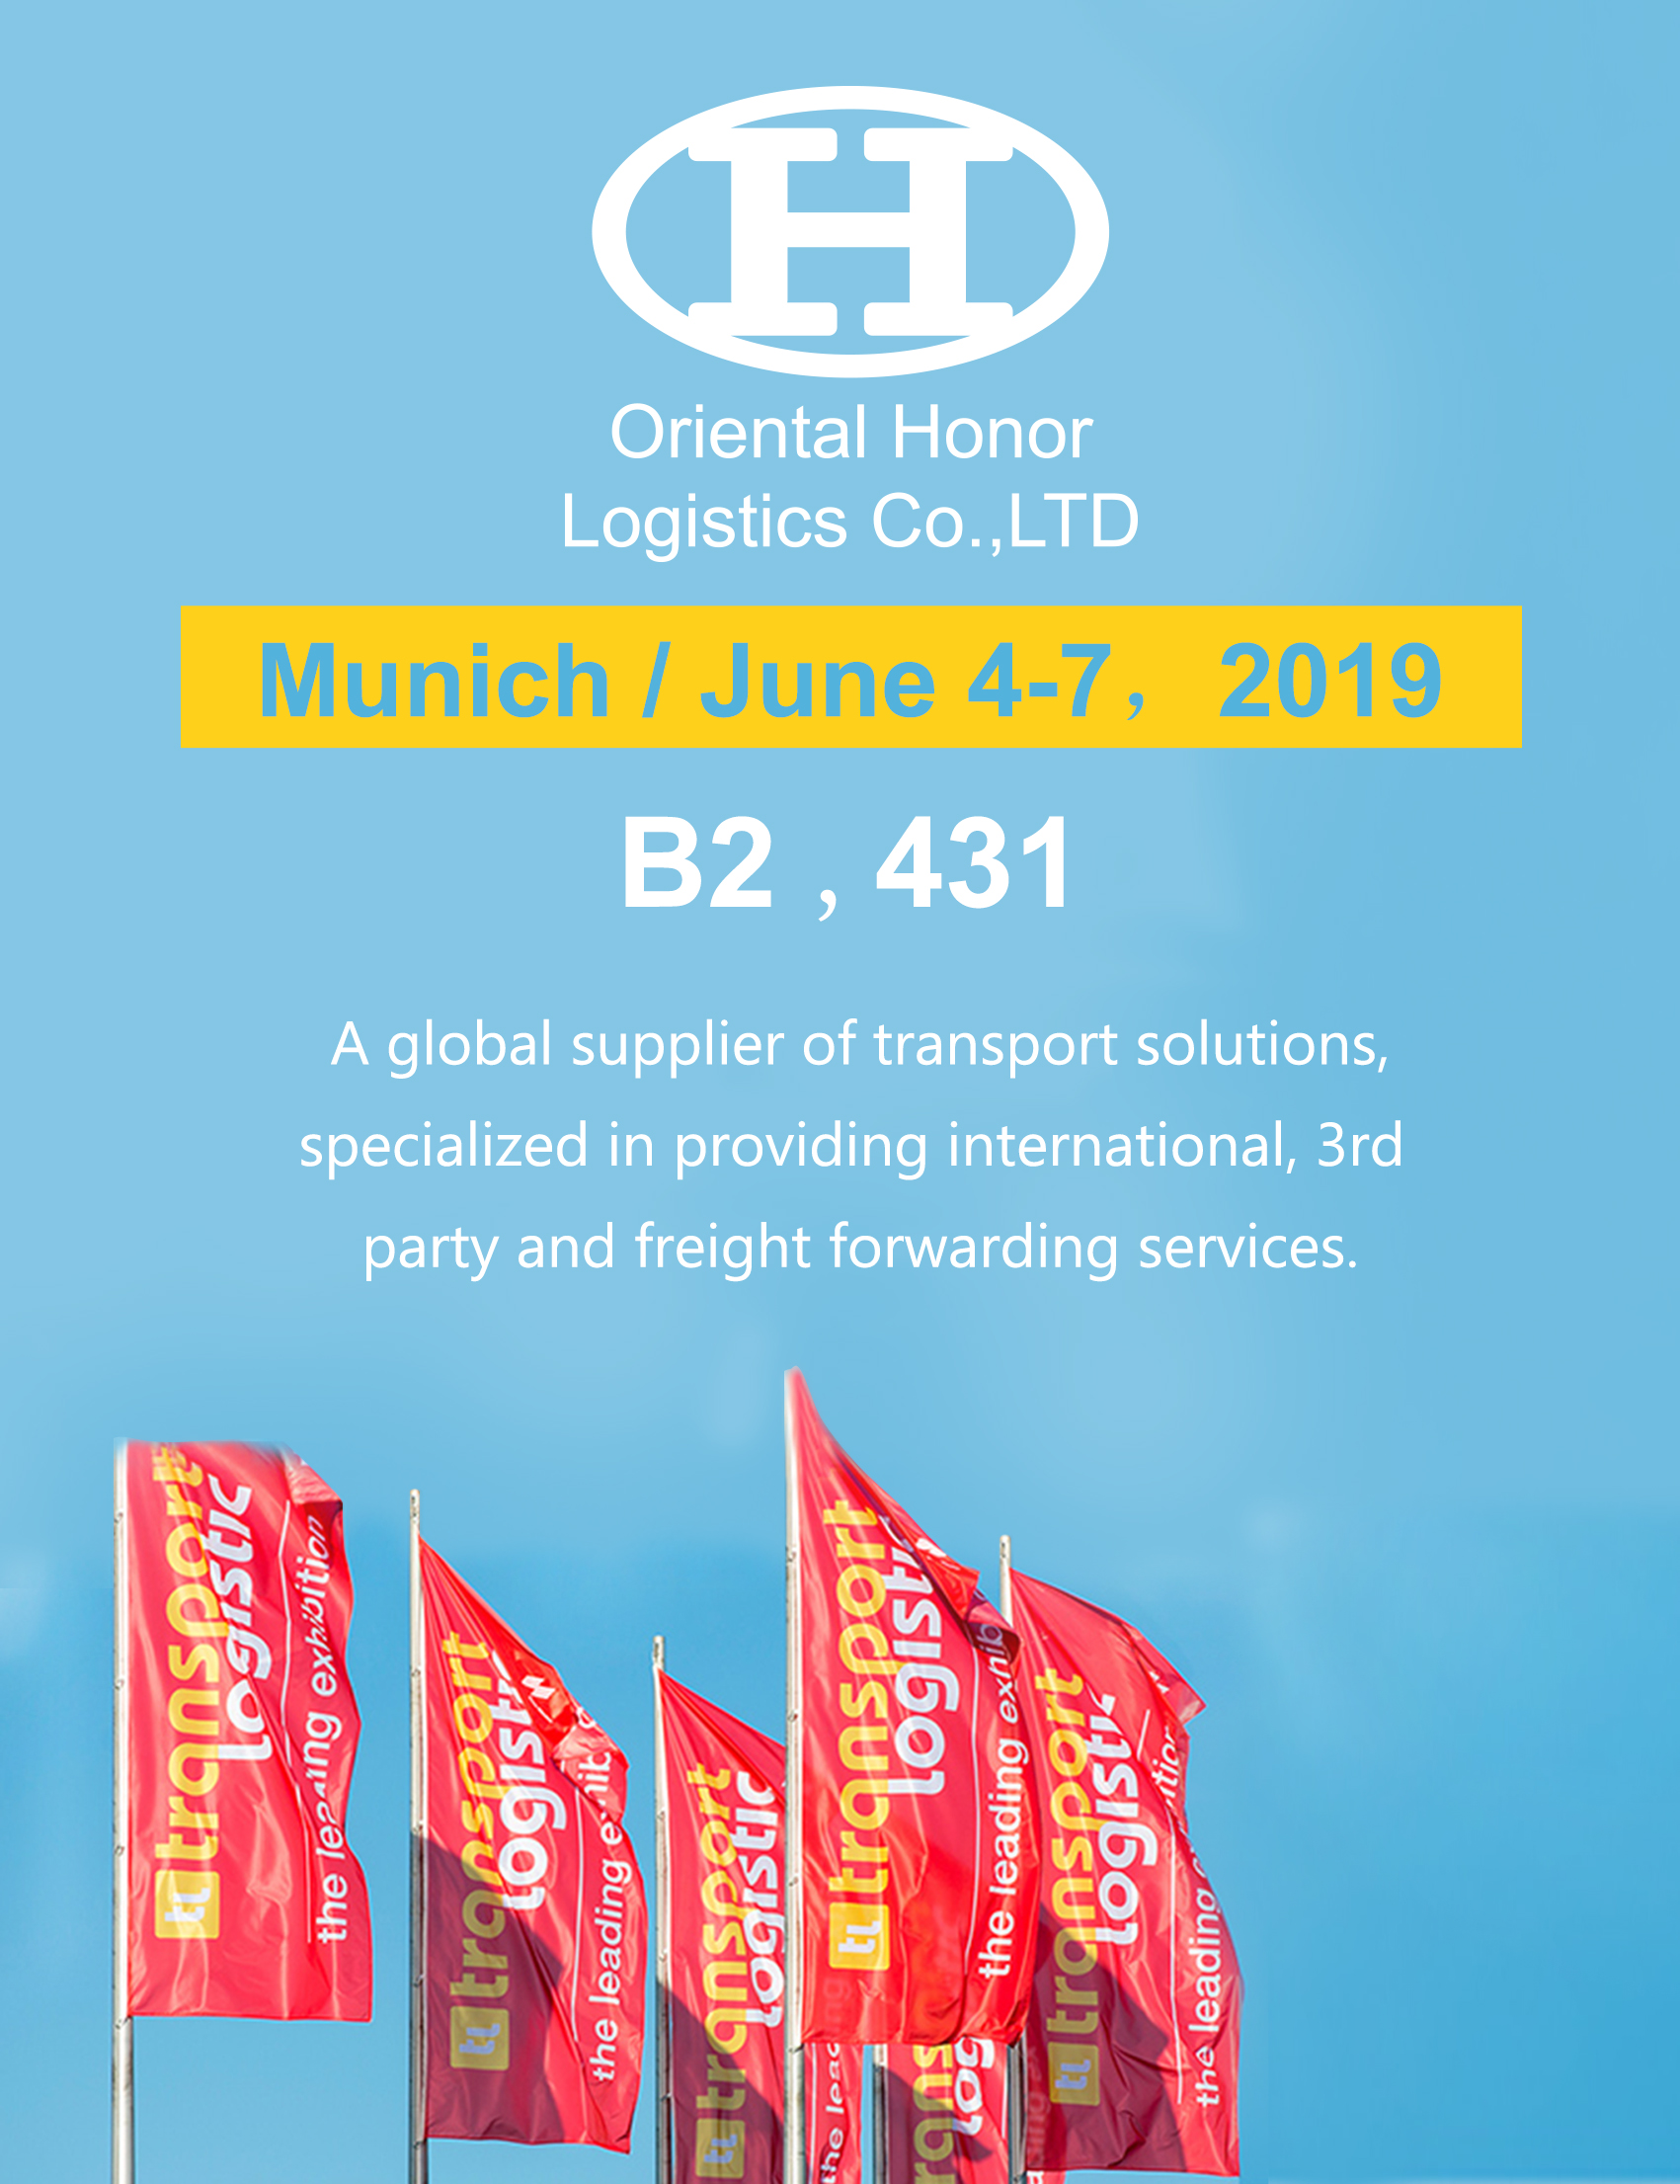 OHL attends the Munich exhibition in Germany